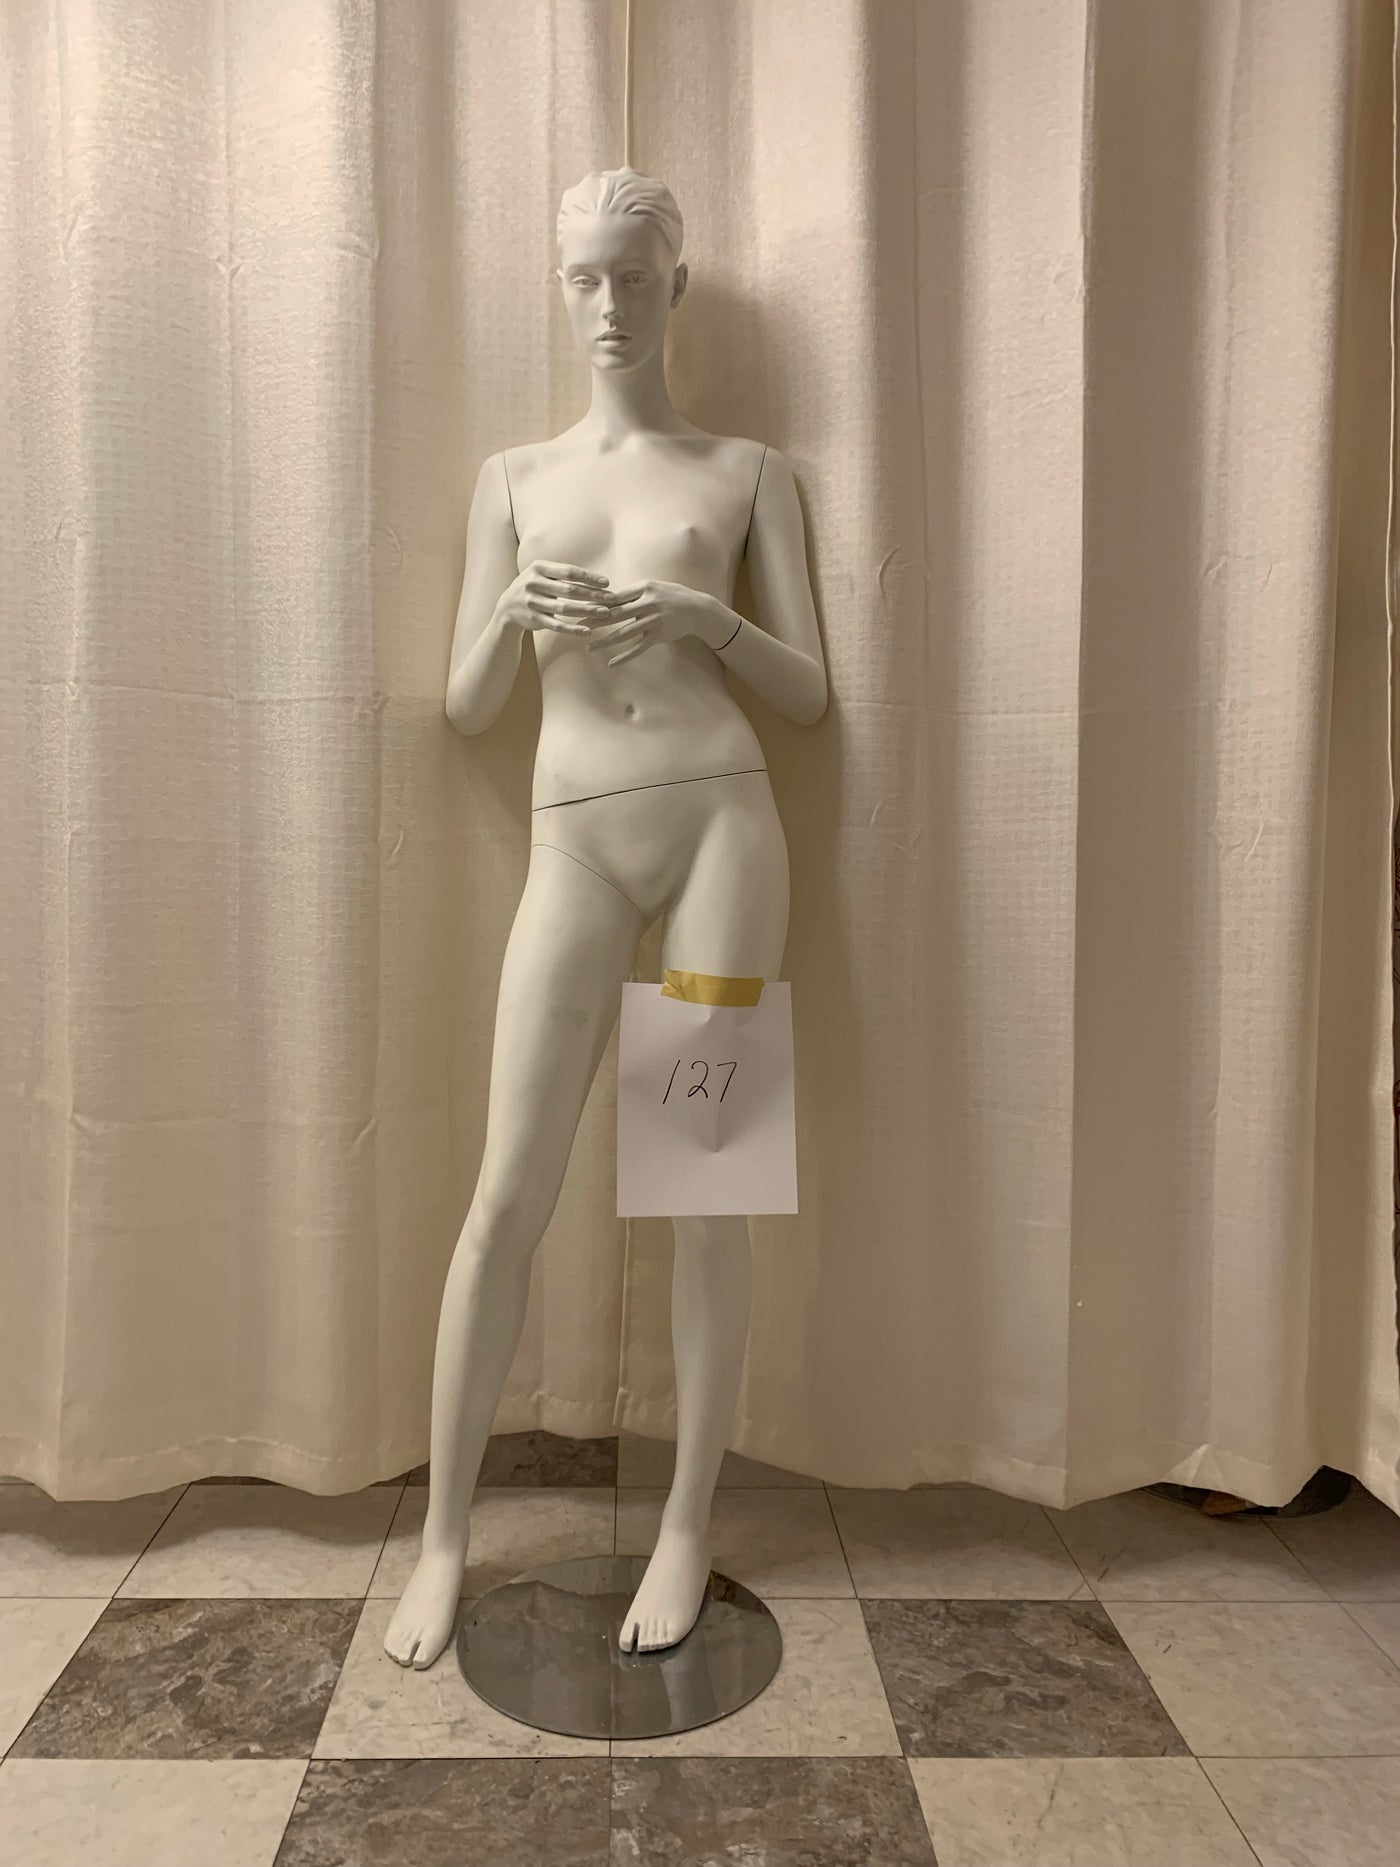 Used Female Adel Rootstein Mannequin #127 - Girl Thing